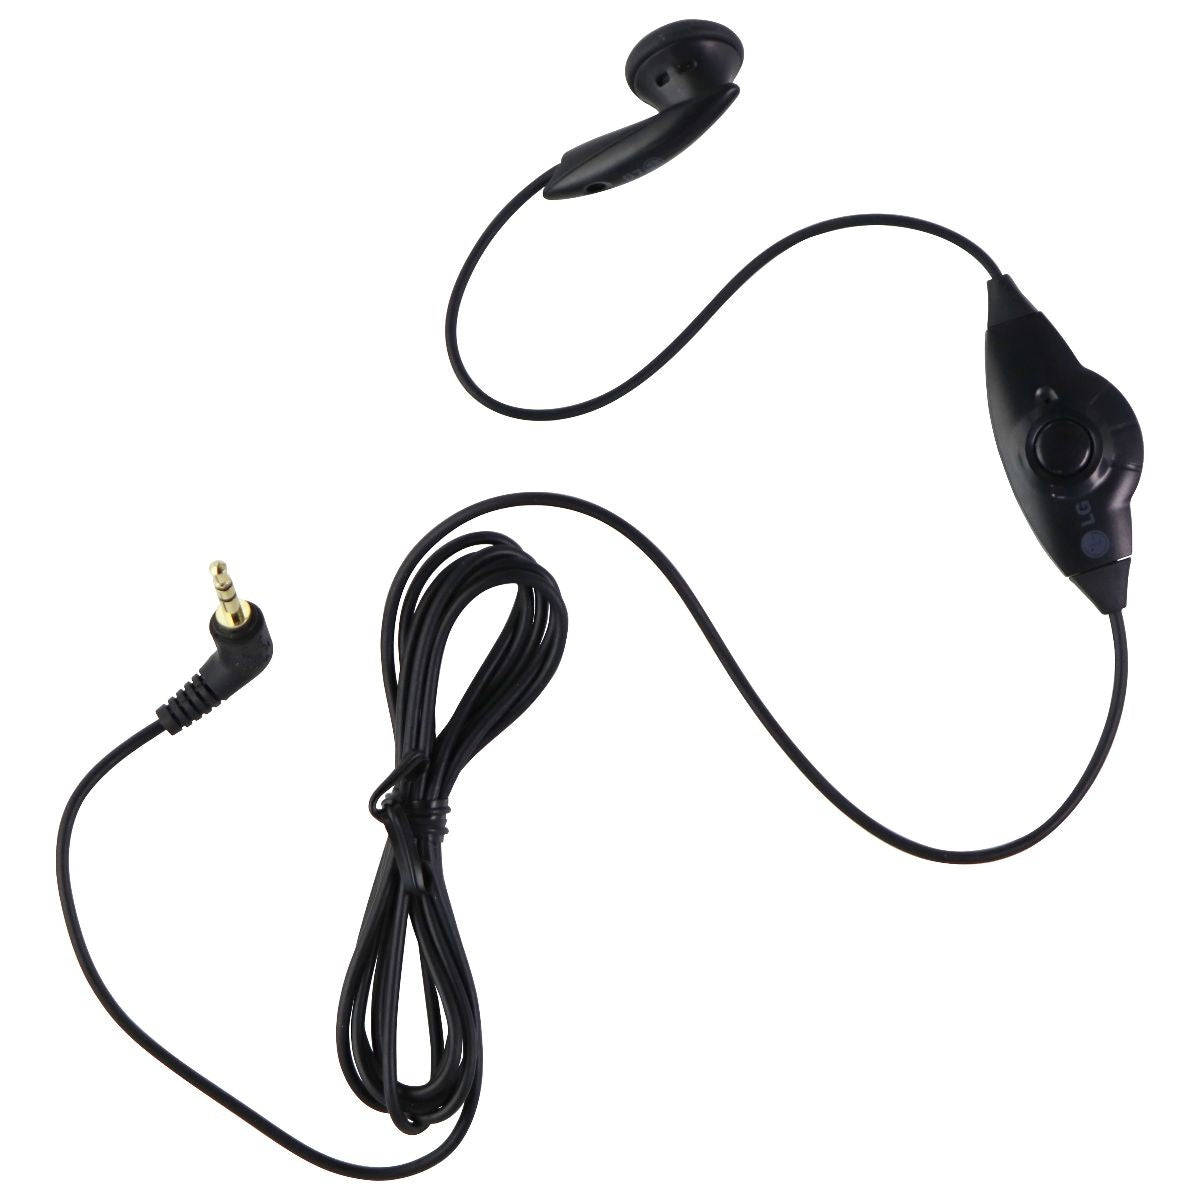 LG 2.5mm Mono Headset with Microphone and Call/Answer Button - Black SGEY0003221 Cell Phone - Headsets LG    - Simple Cell Bulk Wholesale Pricing - USA Seller